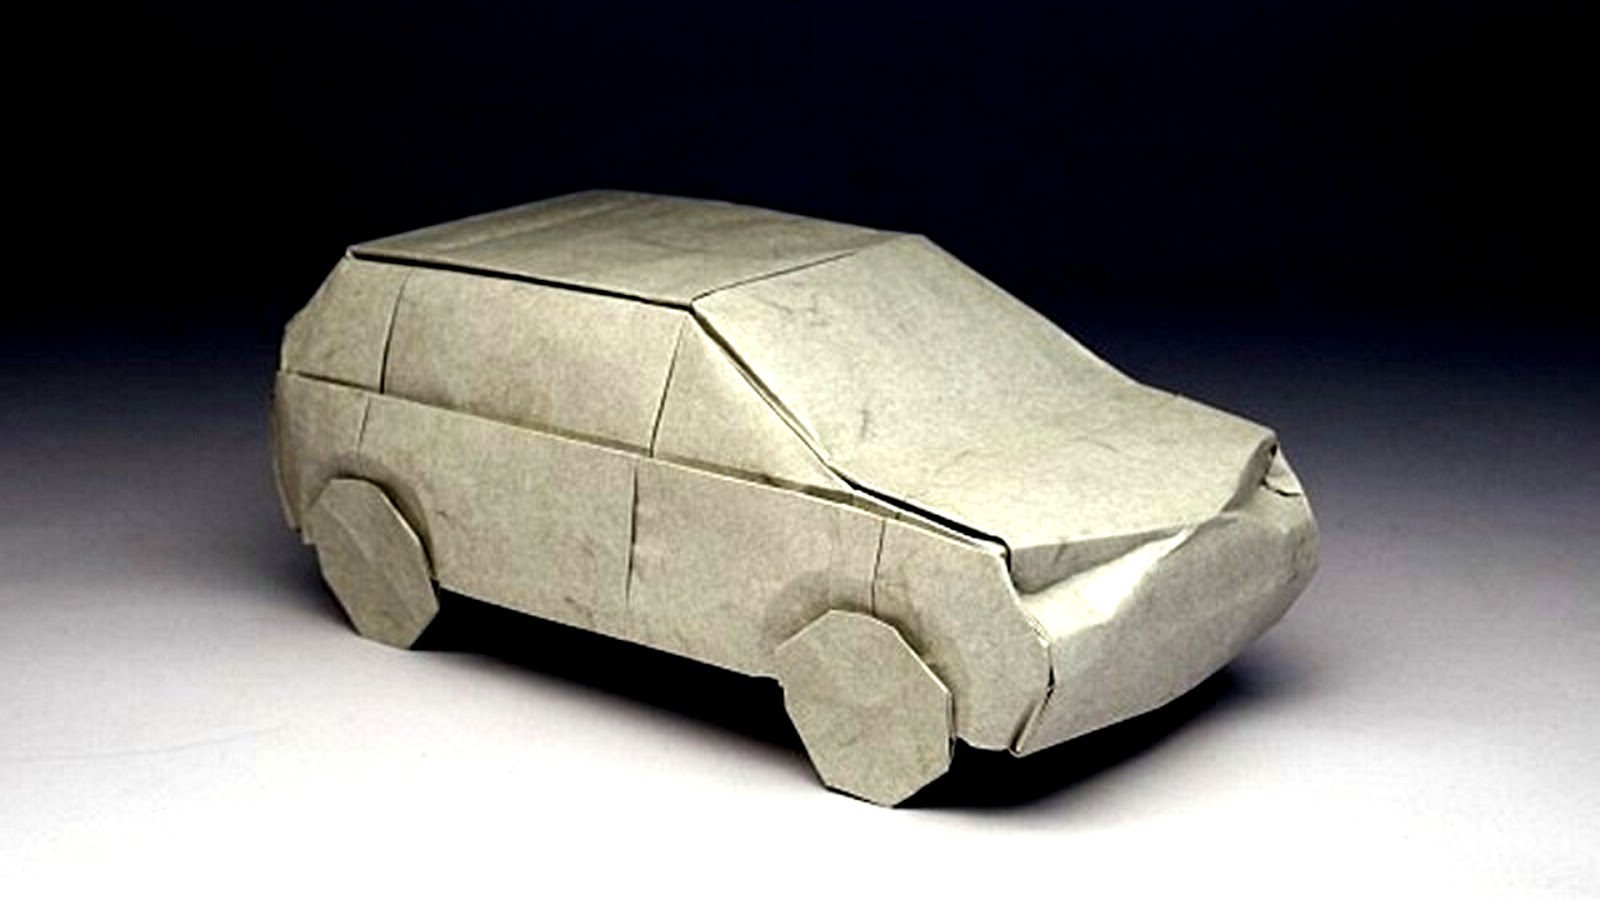 How To Make A Paper Car Origami - Origami Choices